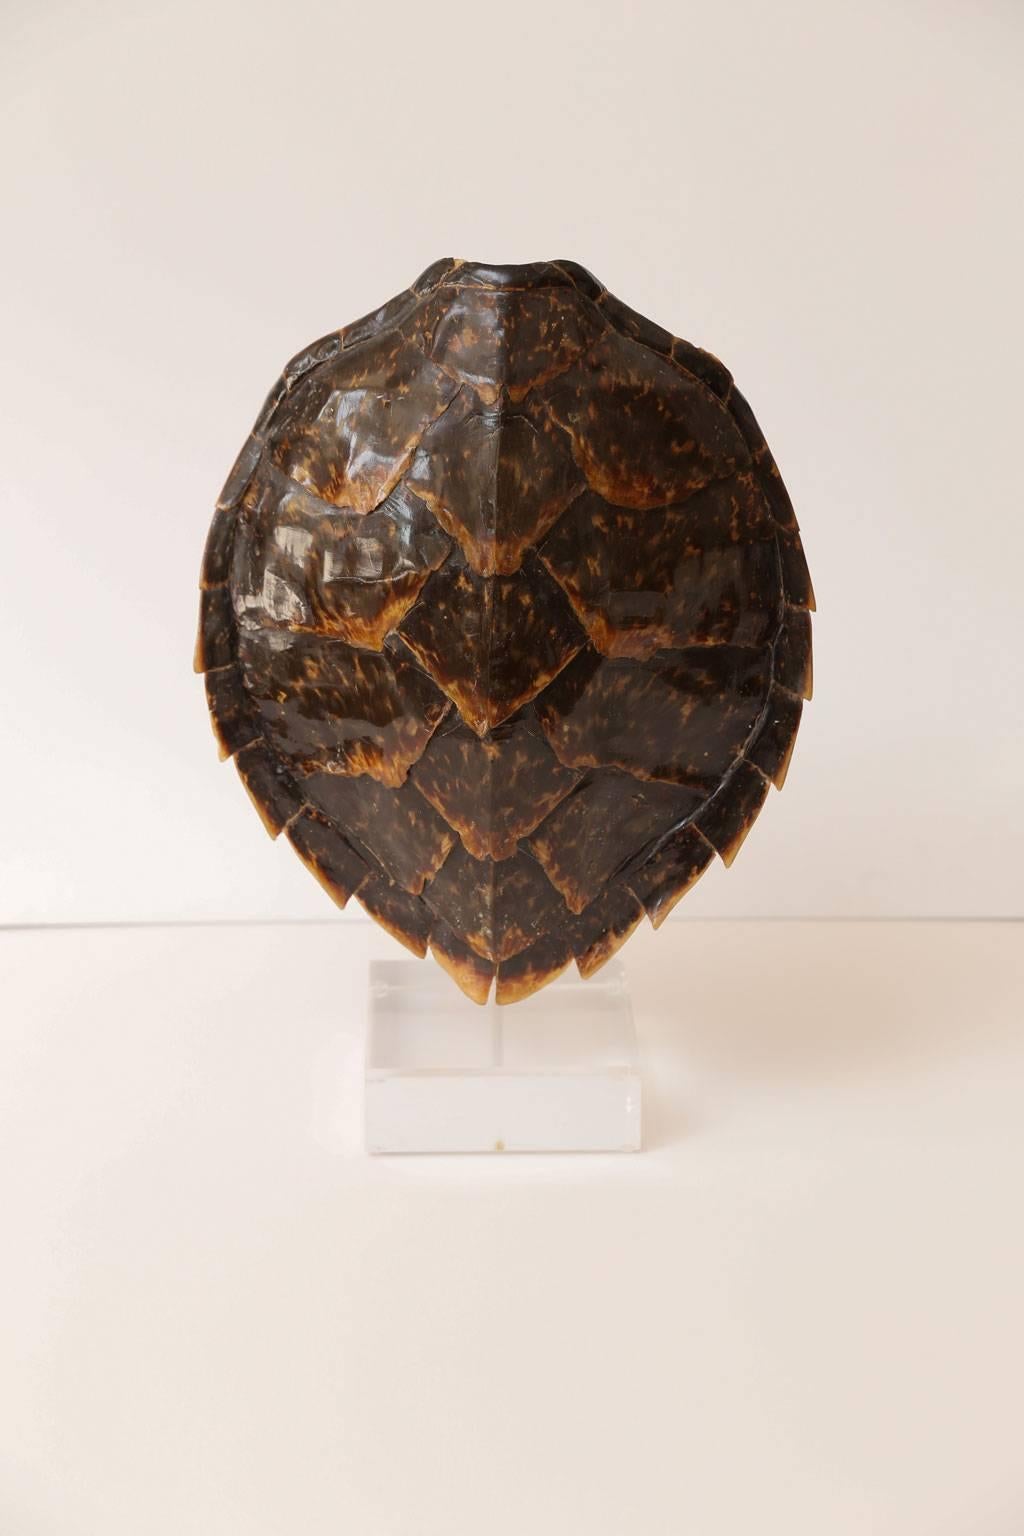 Large vintage tortoiseshell or carapace, mounted on iron Stand with Lucite base.